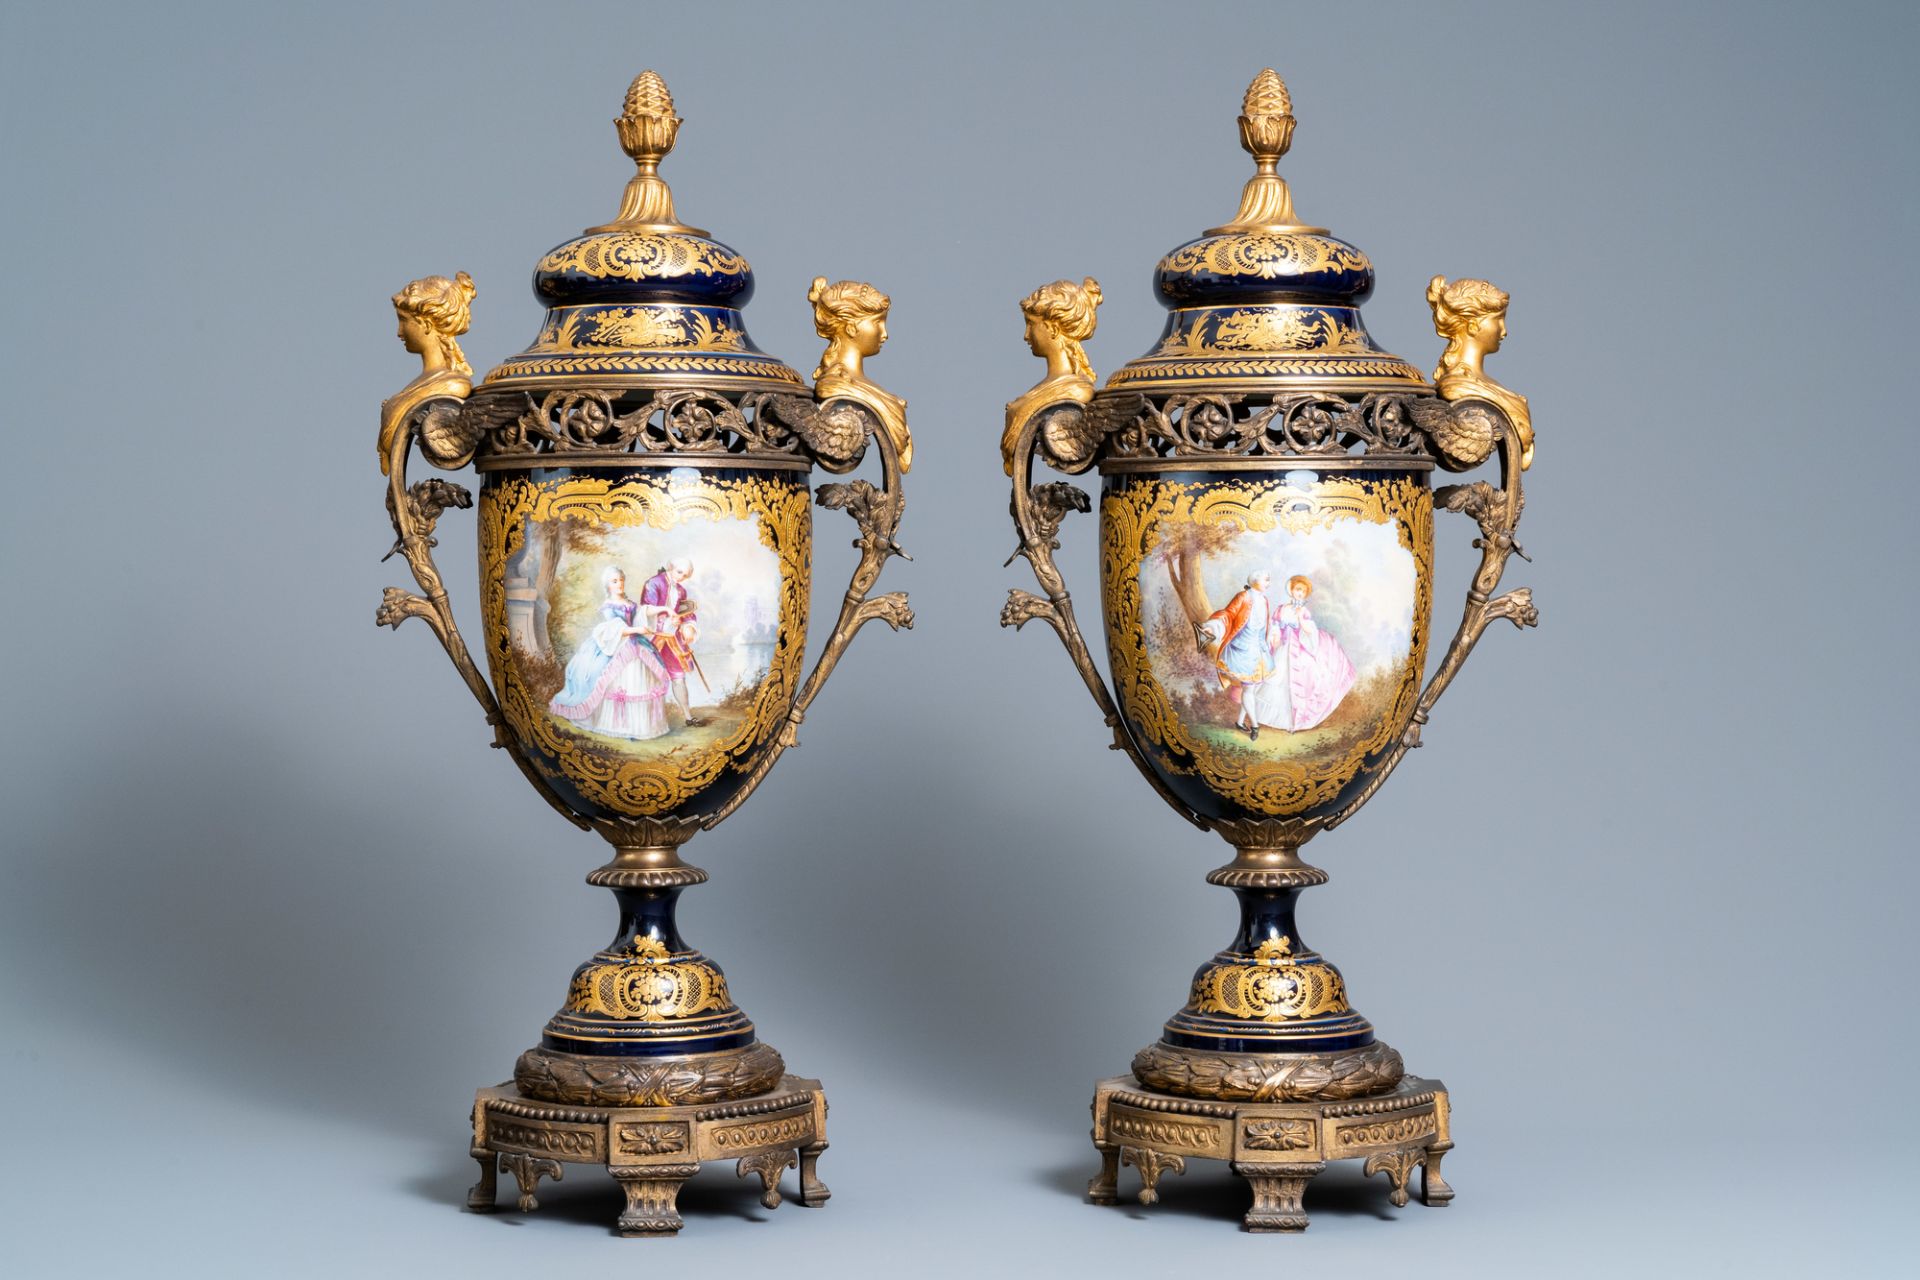 A pair of large French Svres-style vases with gilded bronze mounts, signed Le Berre, 19th C.